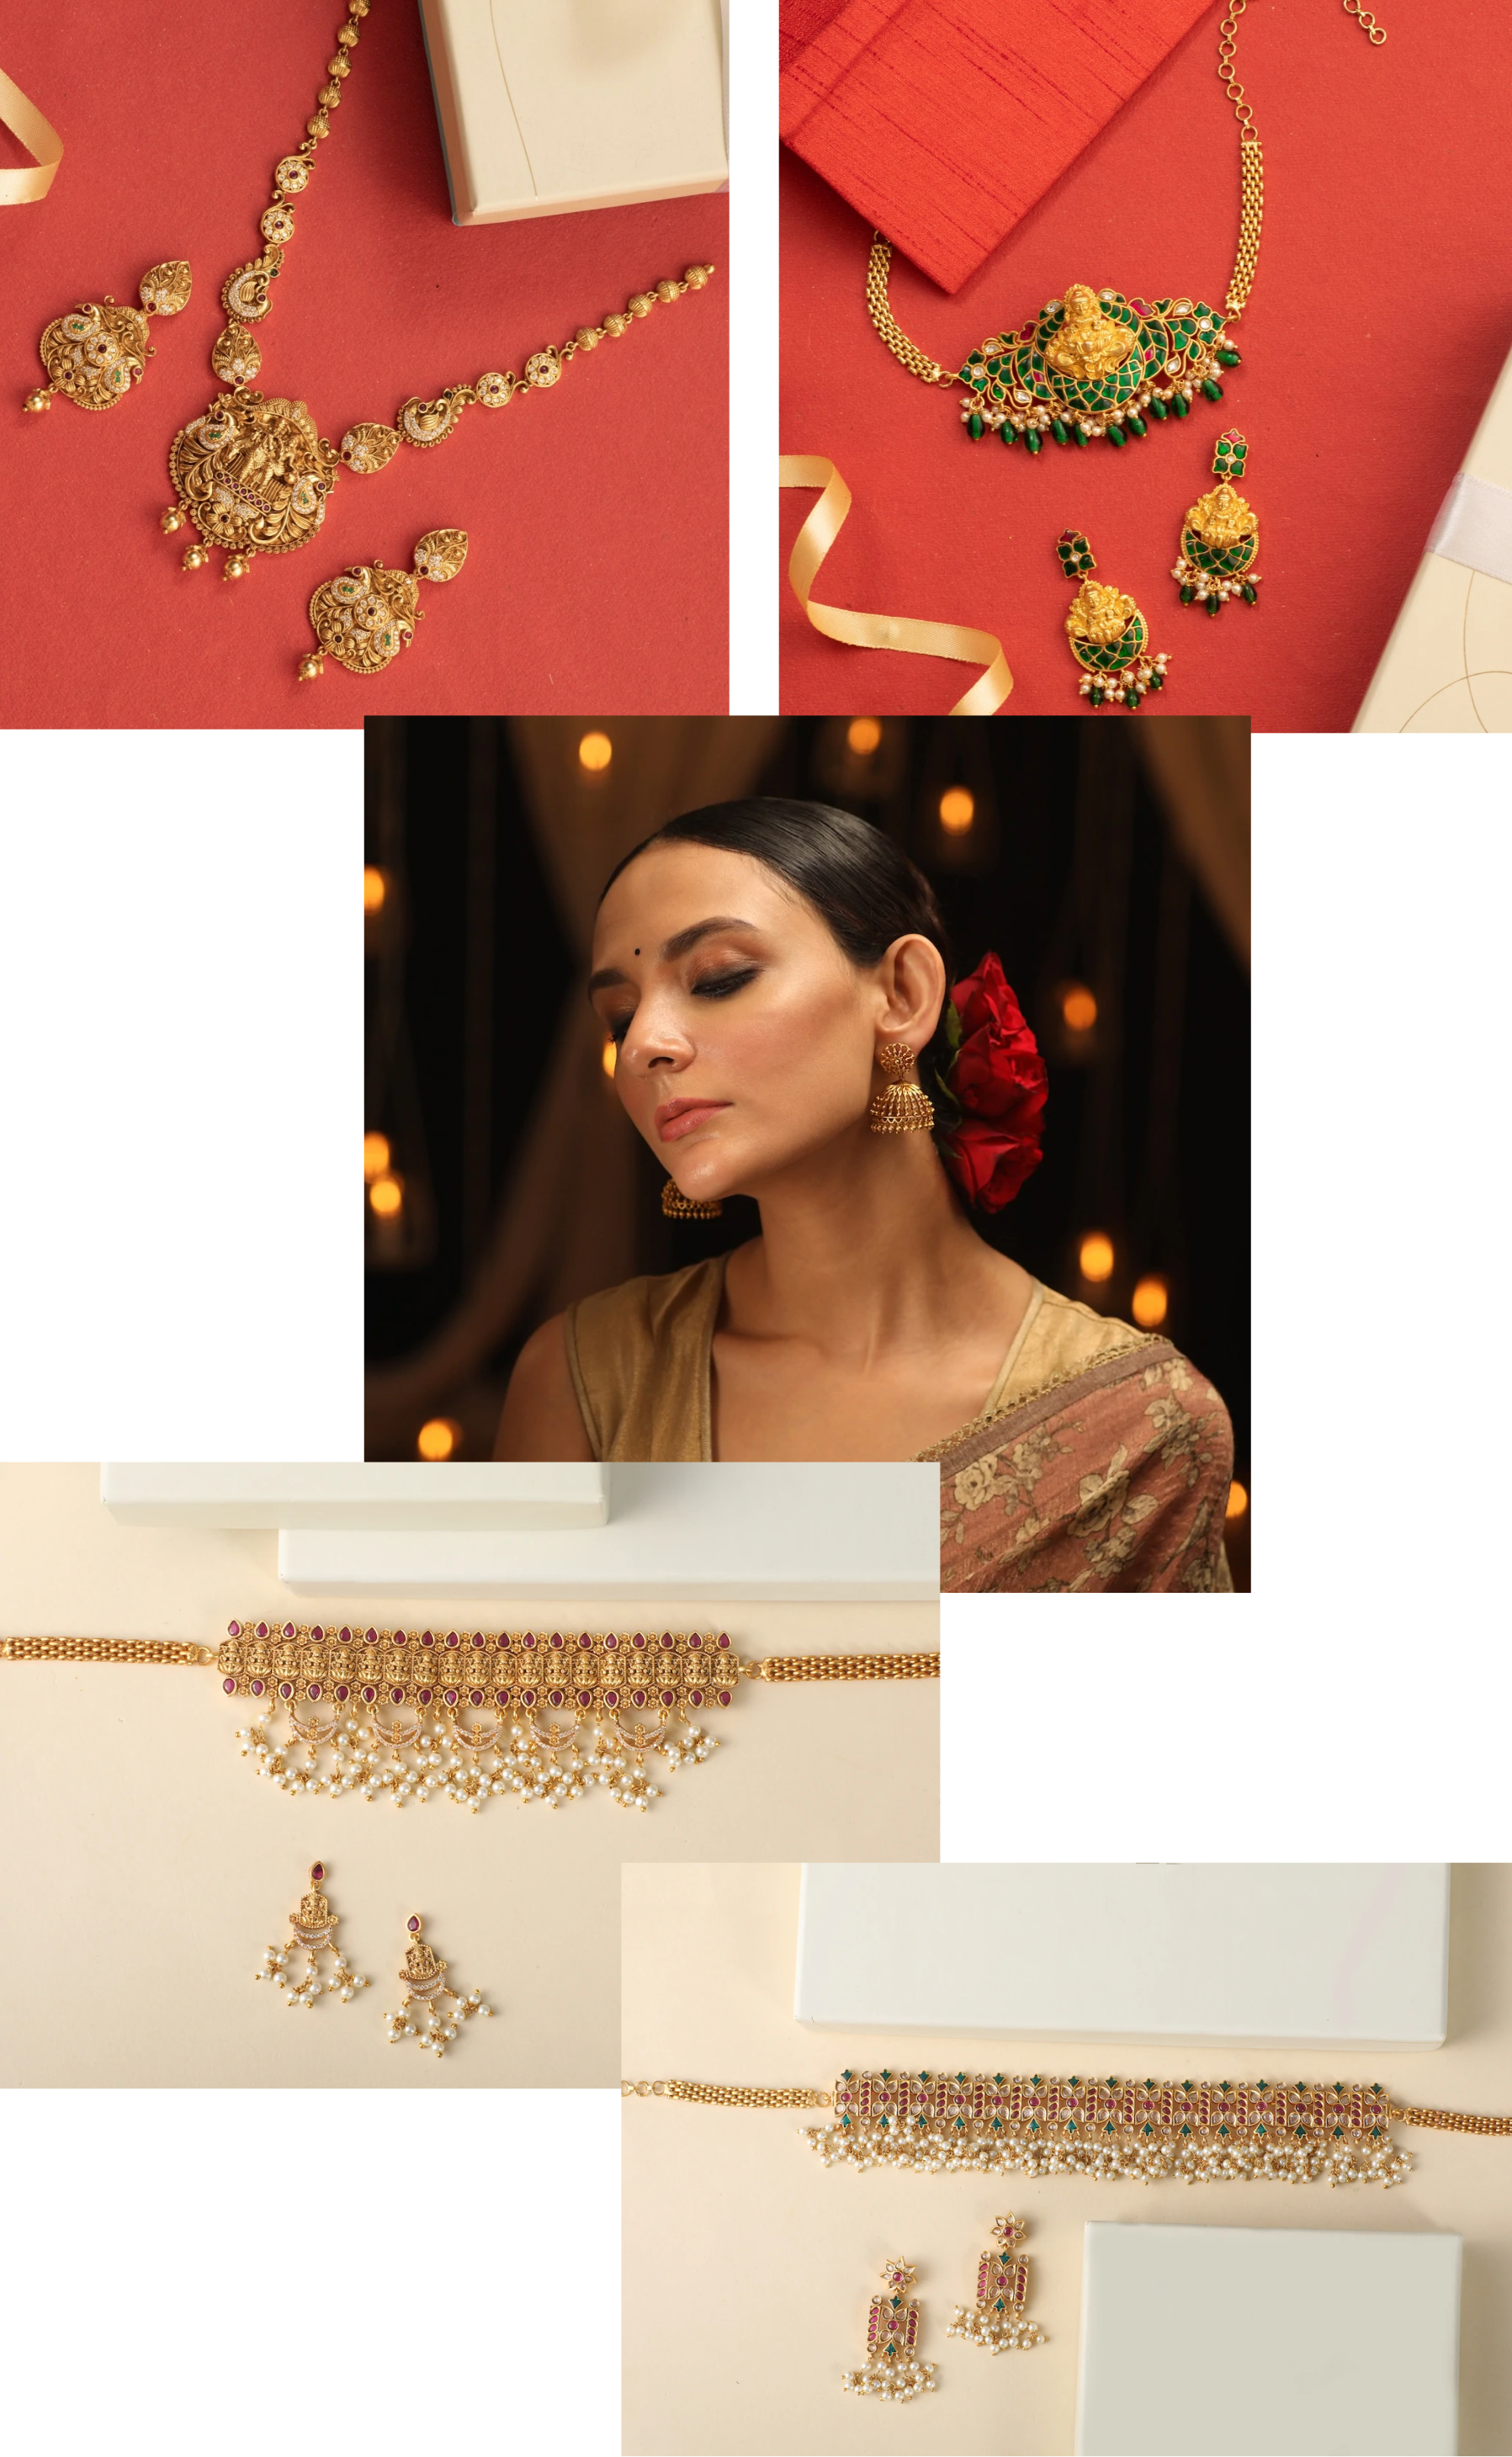 photo collage of indian jewelry sets and models wearing it